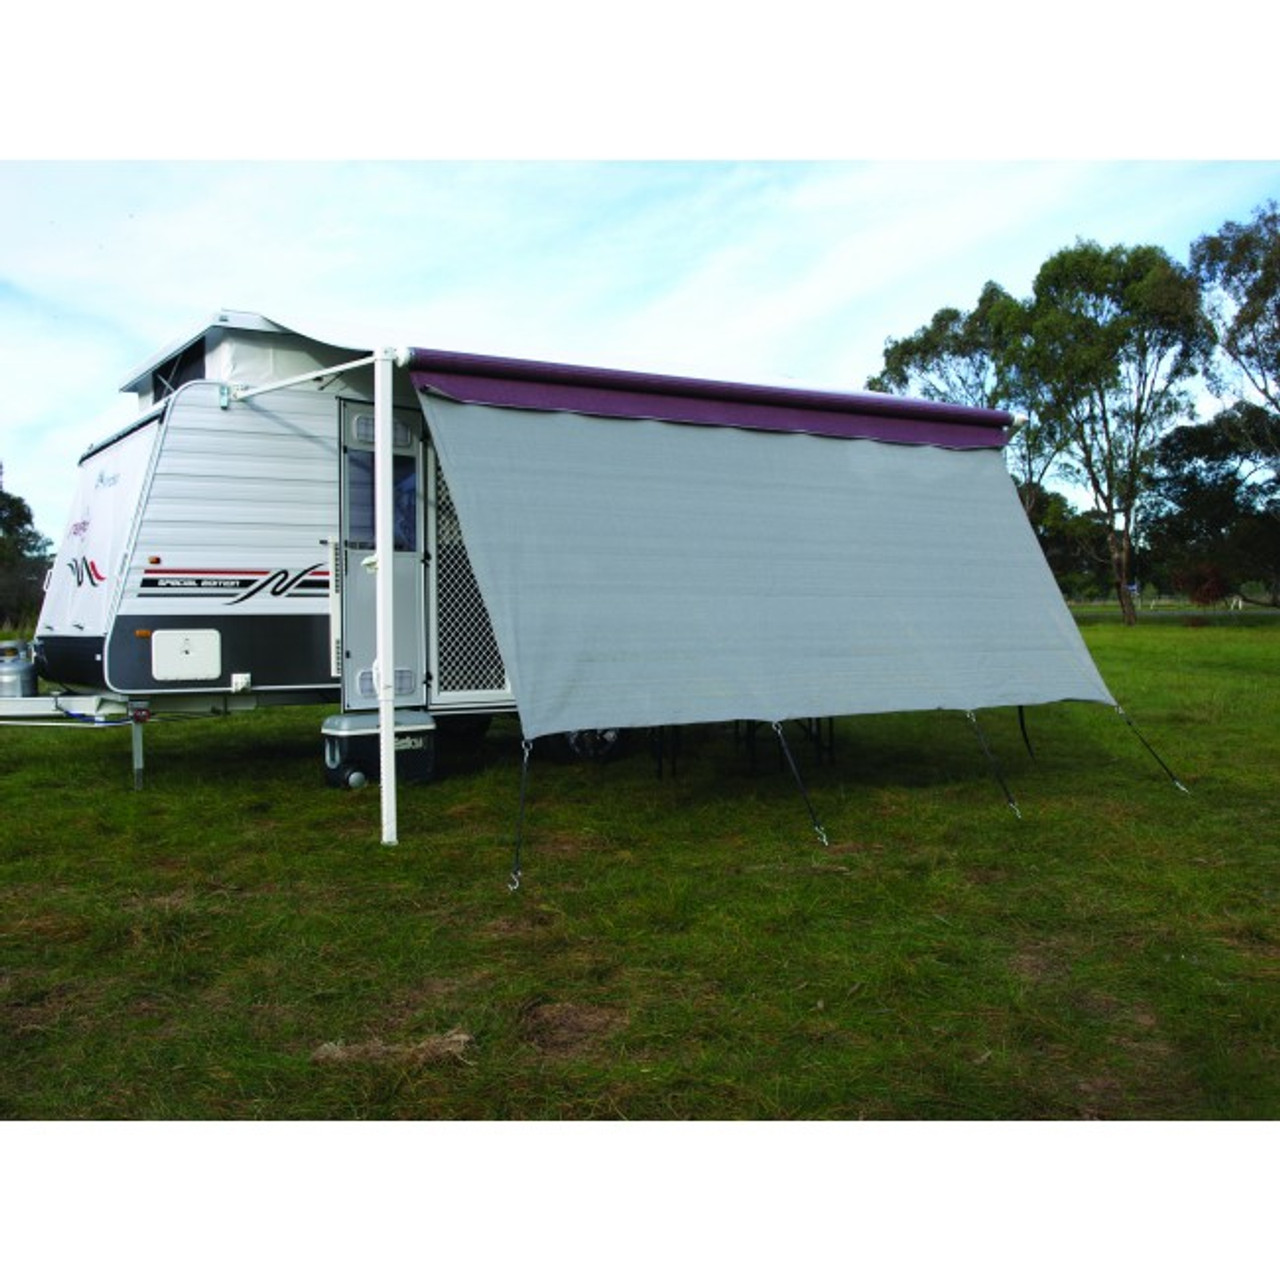 Camec Privacy Screen 4.3 x 1.8m With Ropes And Pegs - suits a 15' awning